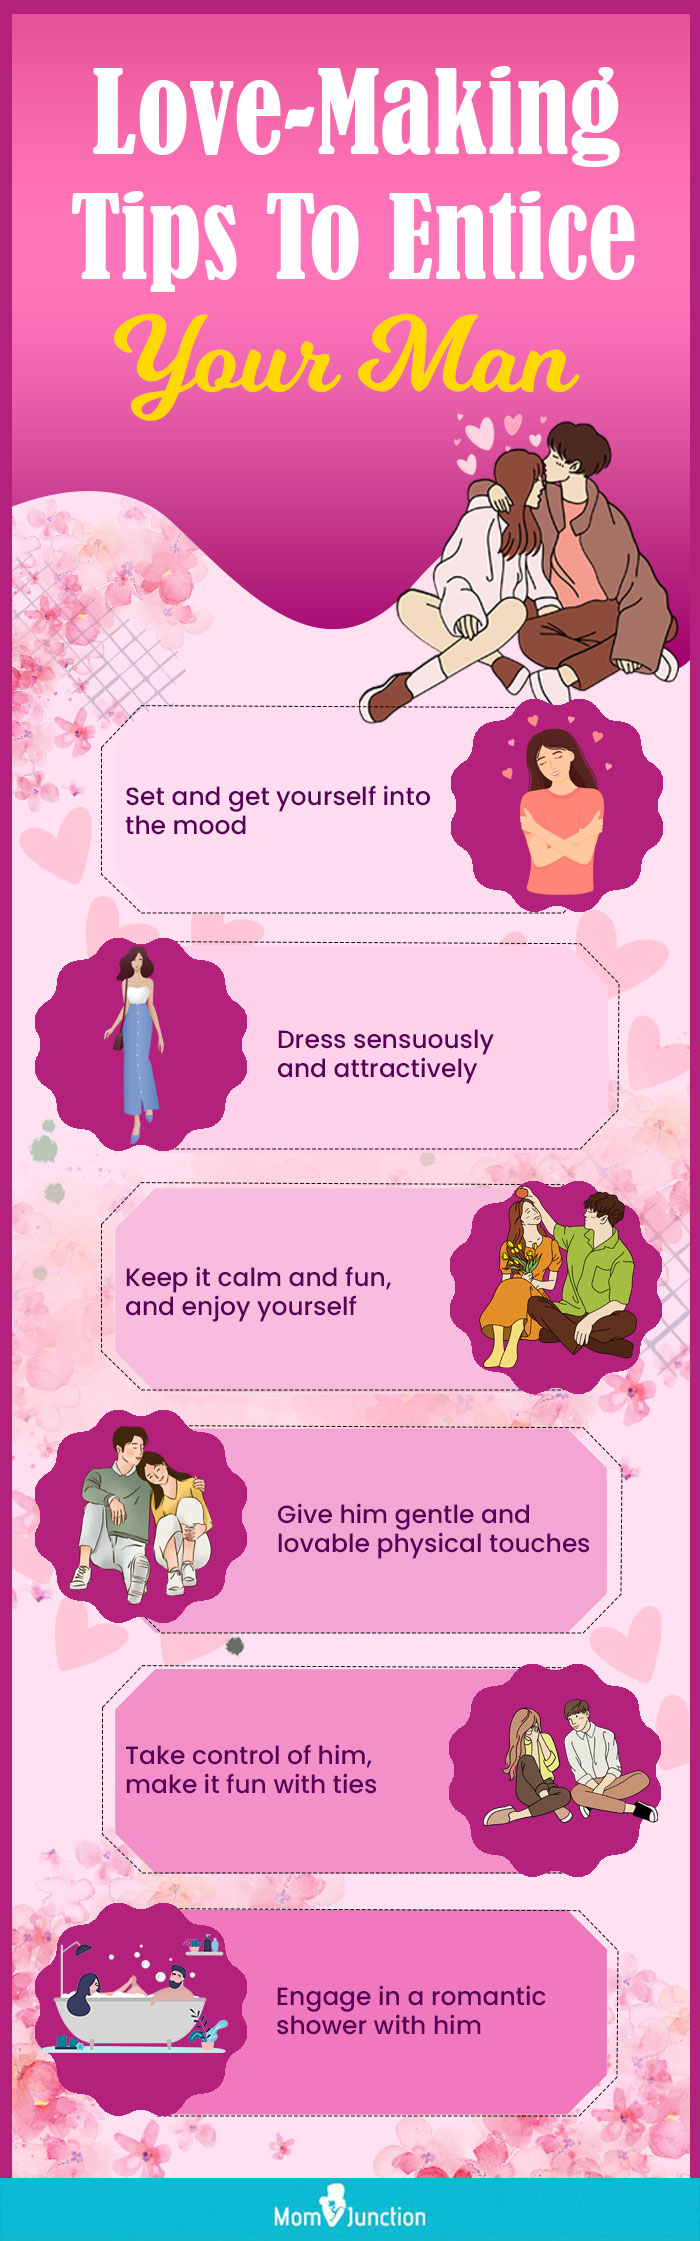 love making tips to entice your man (infographic)